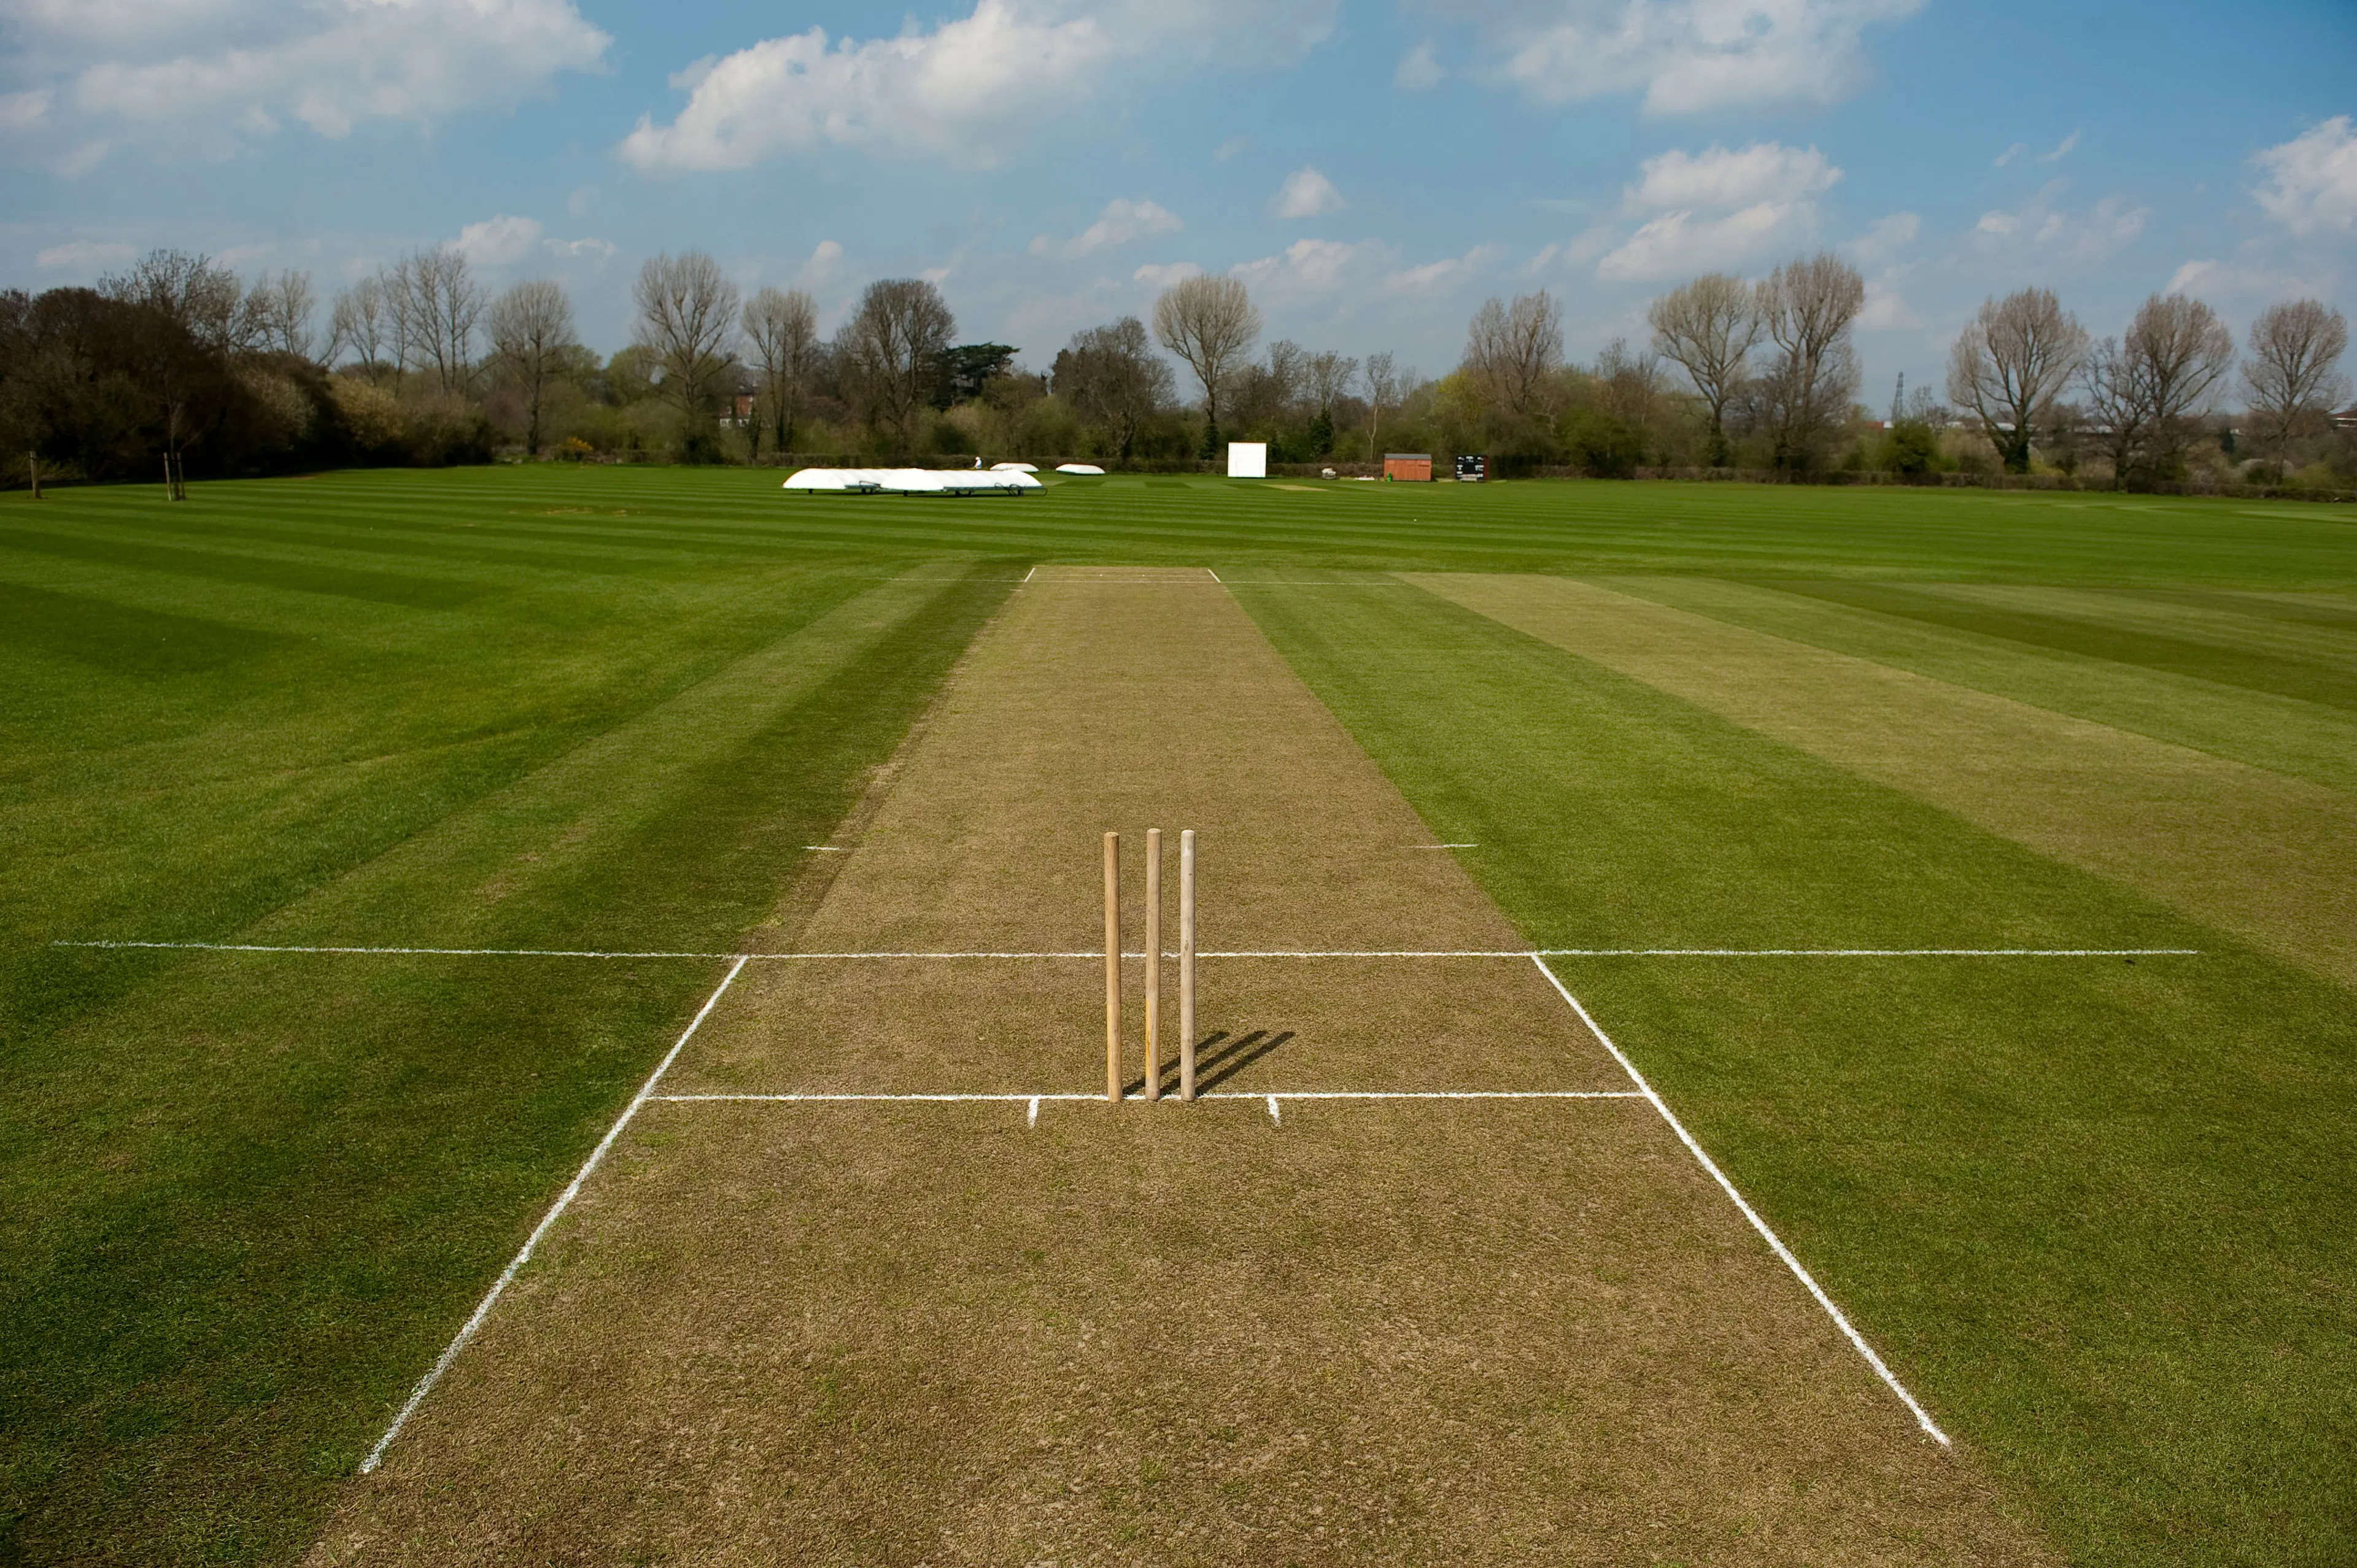 Know About Cricket Pitch Length, Measurements and Dimensions